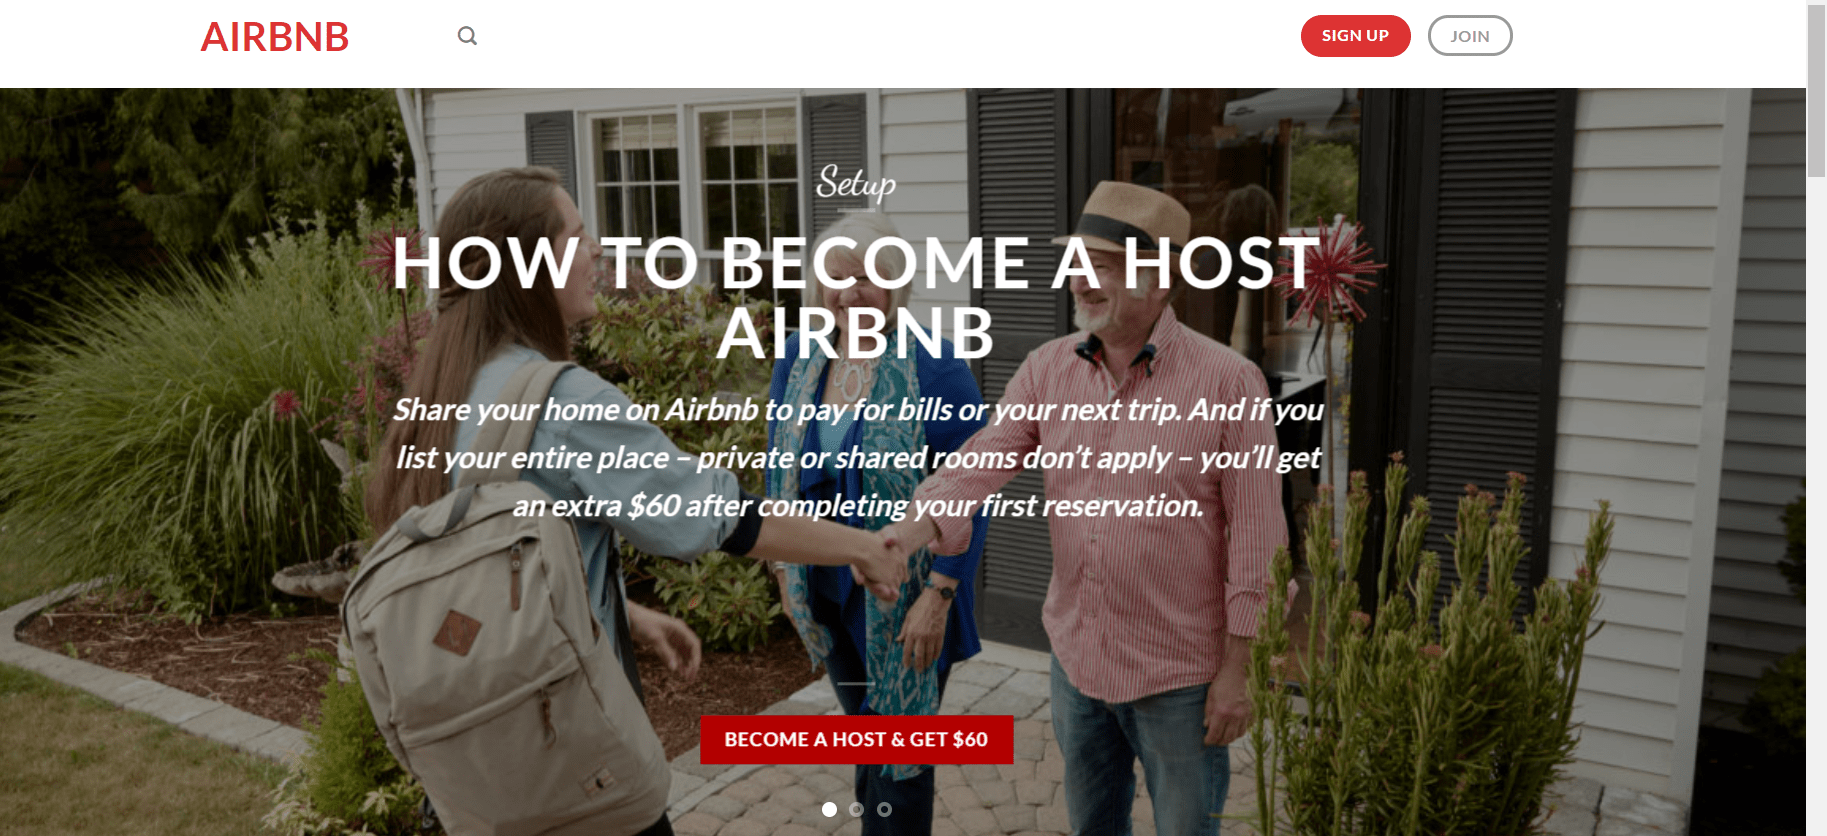 List Your Room On Airbnb - 51 ways to ean money fast